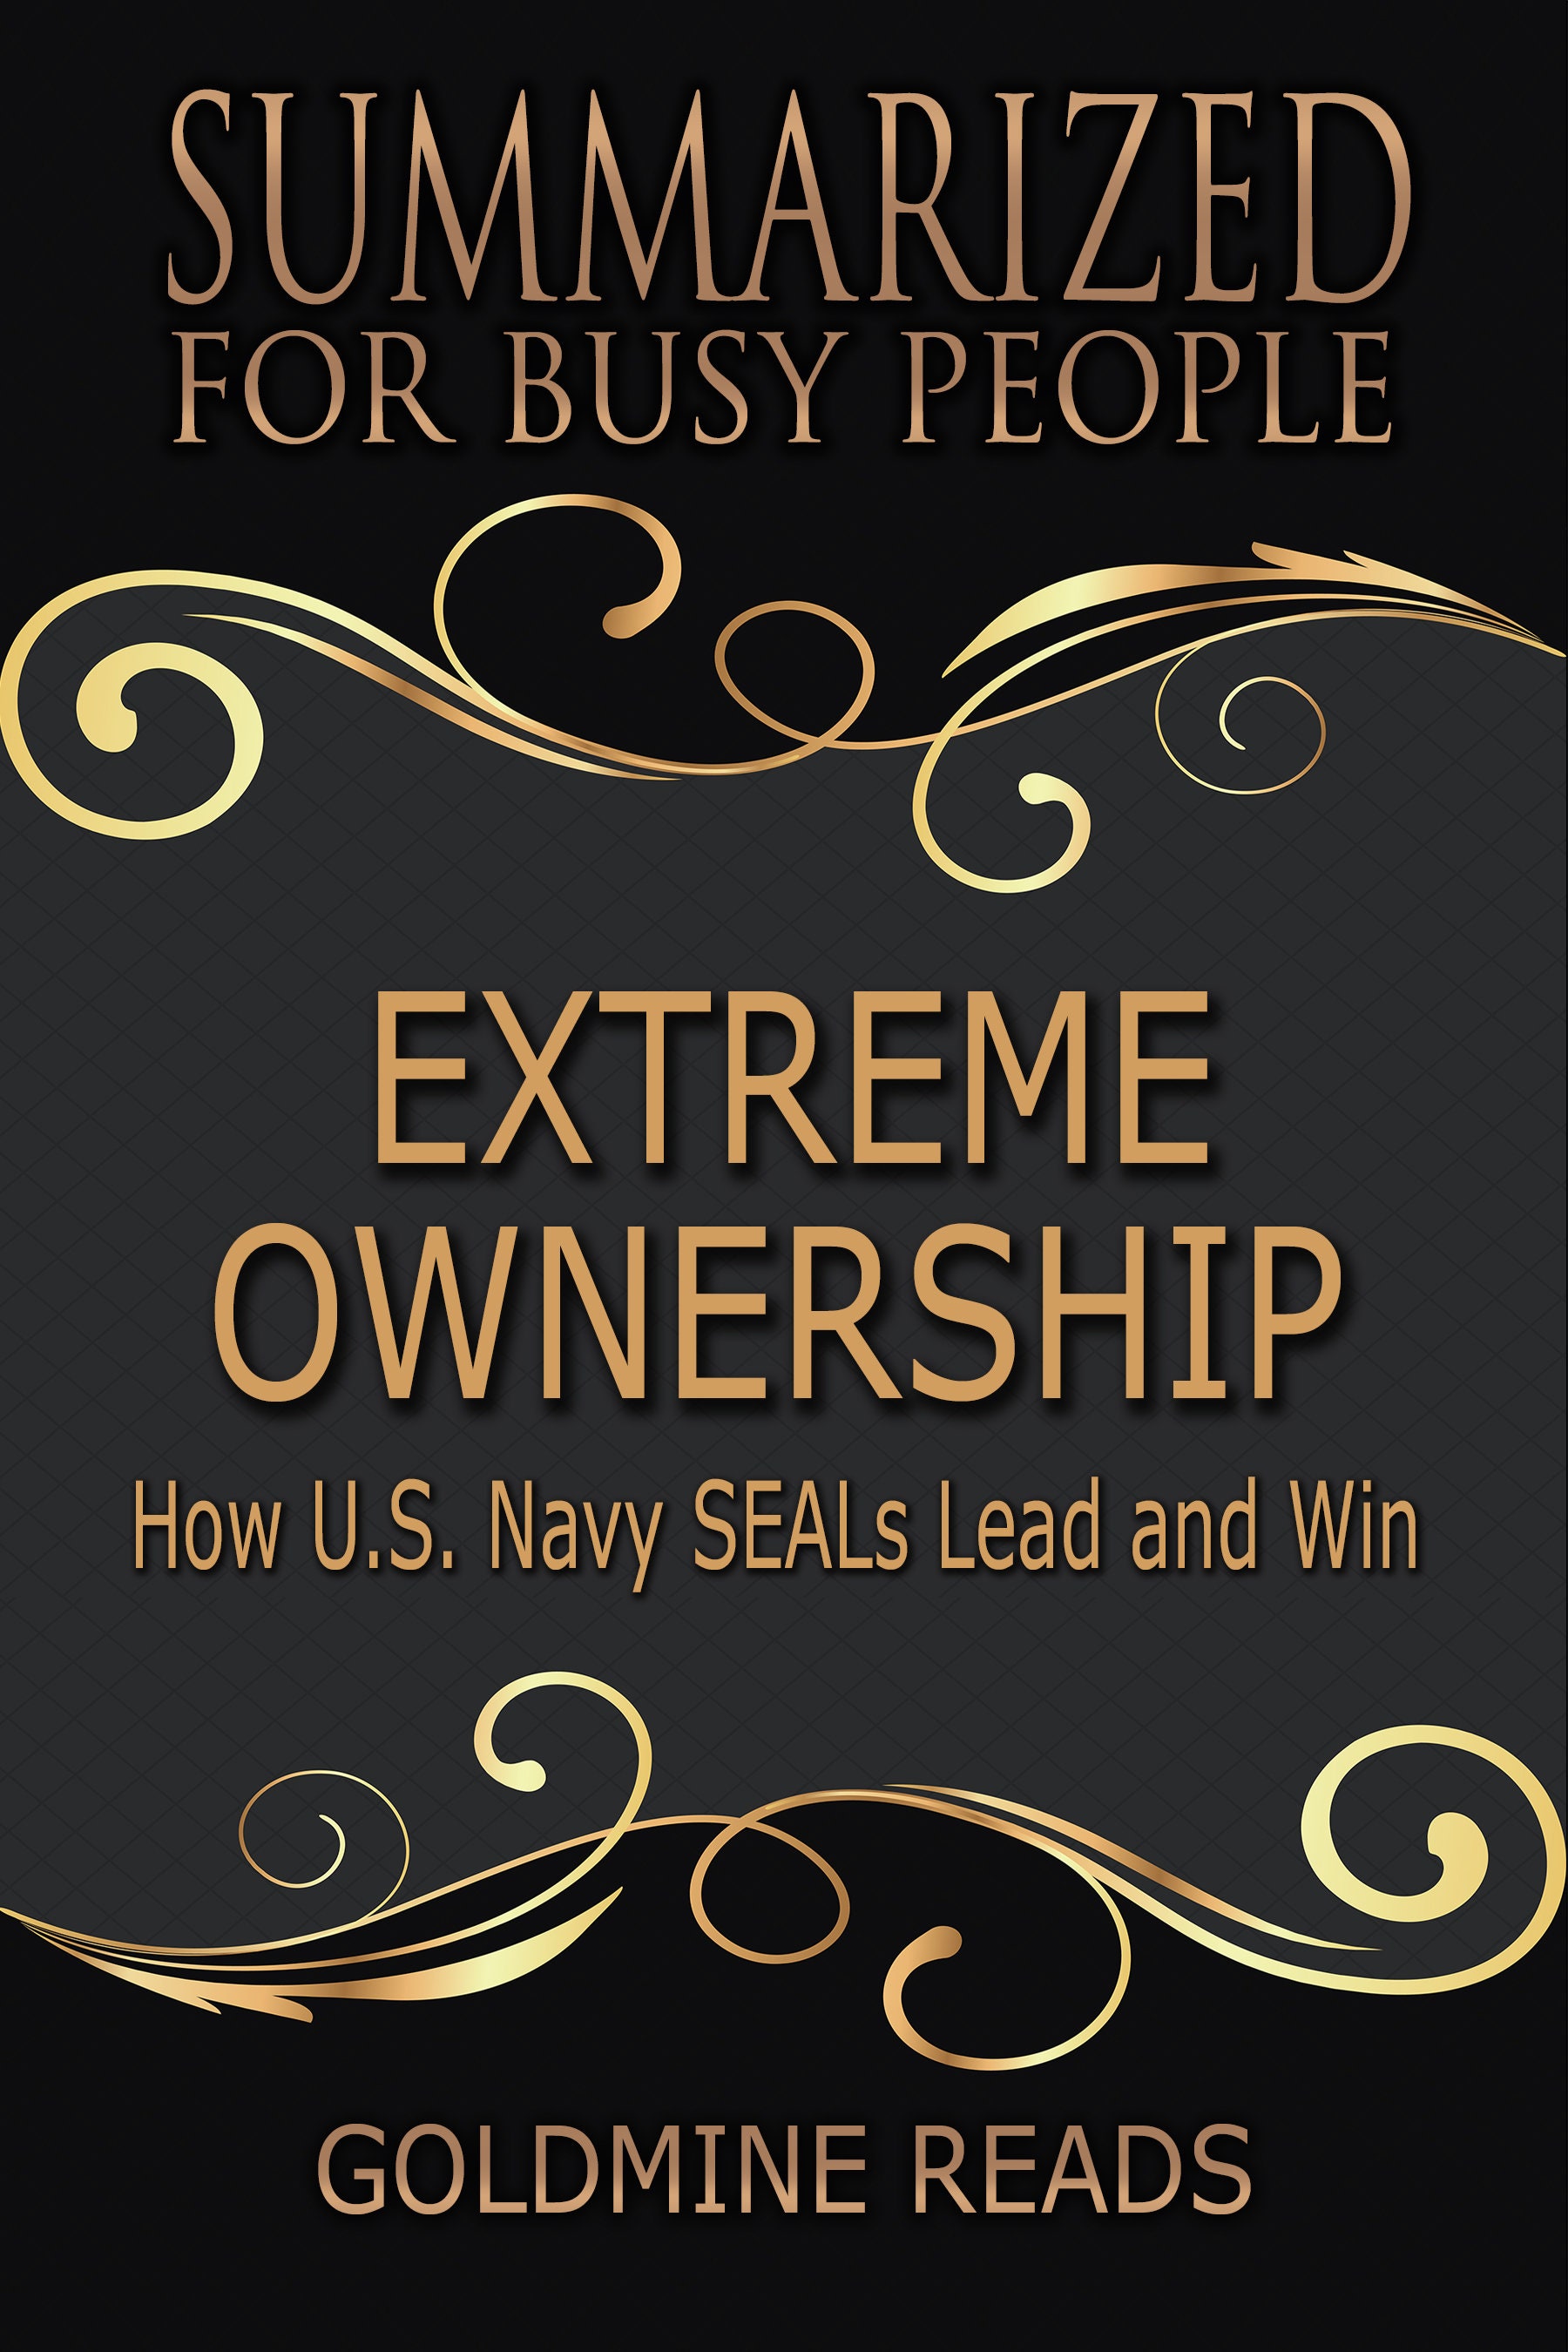 Summarized　Extreme　for　People:　Navy　Ownership　Etsy　Busy　How